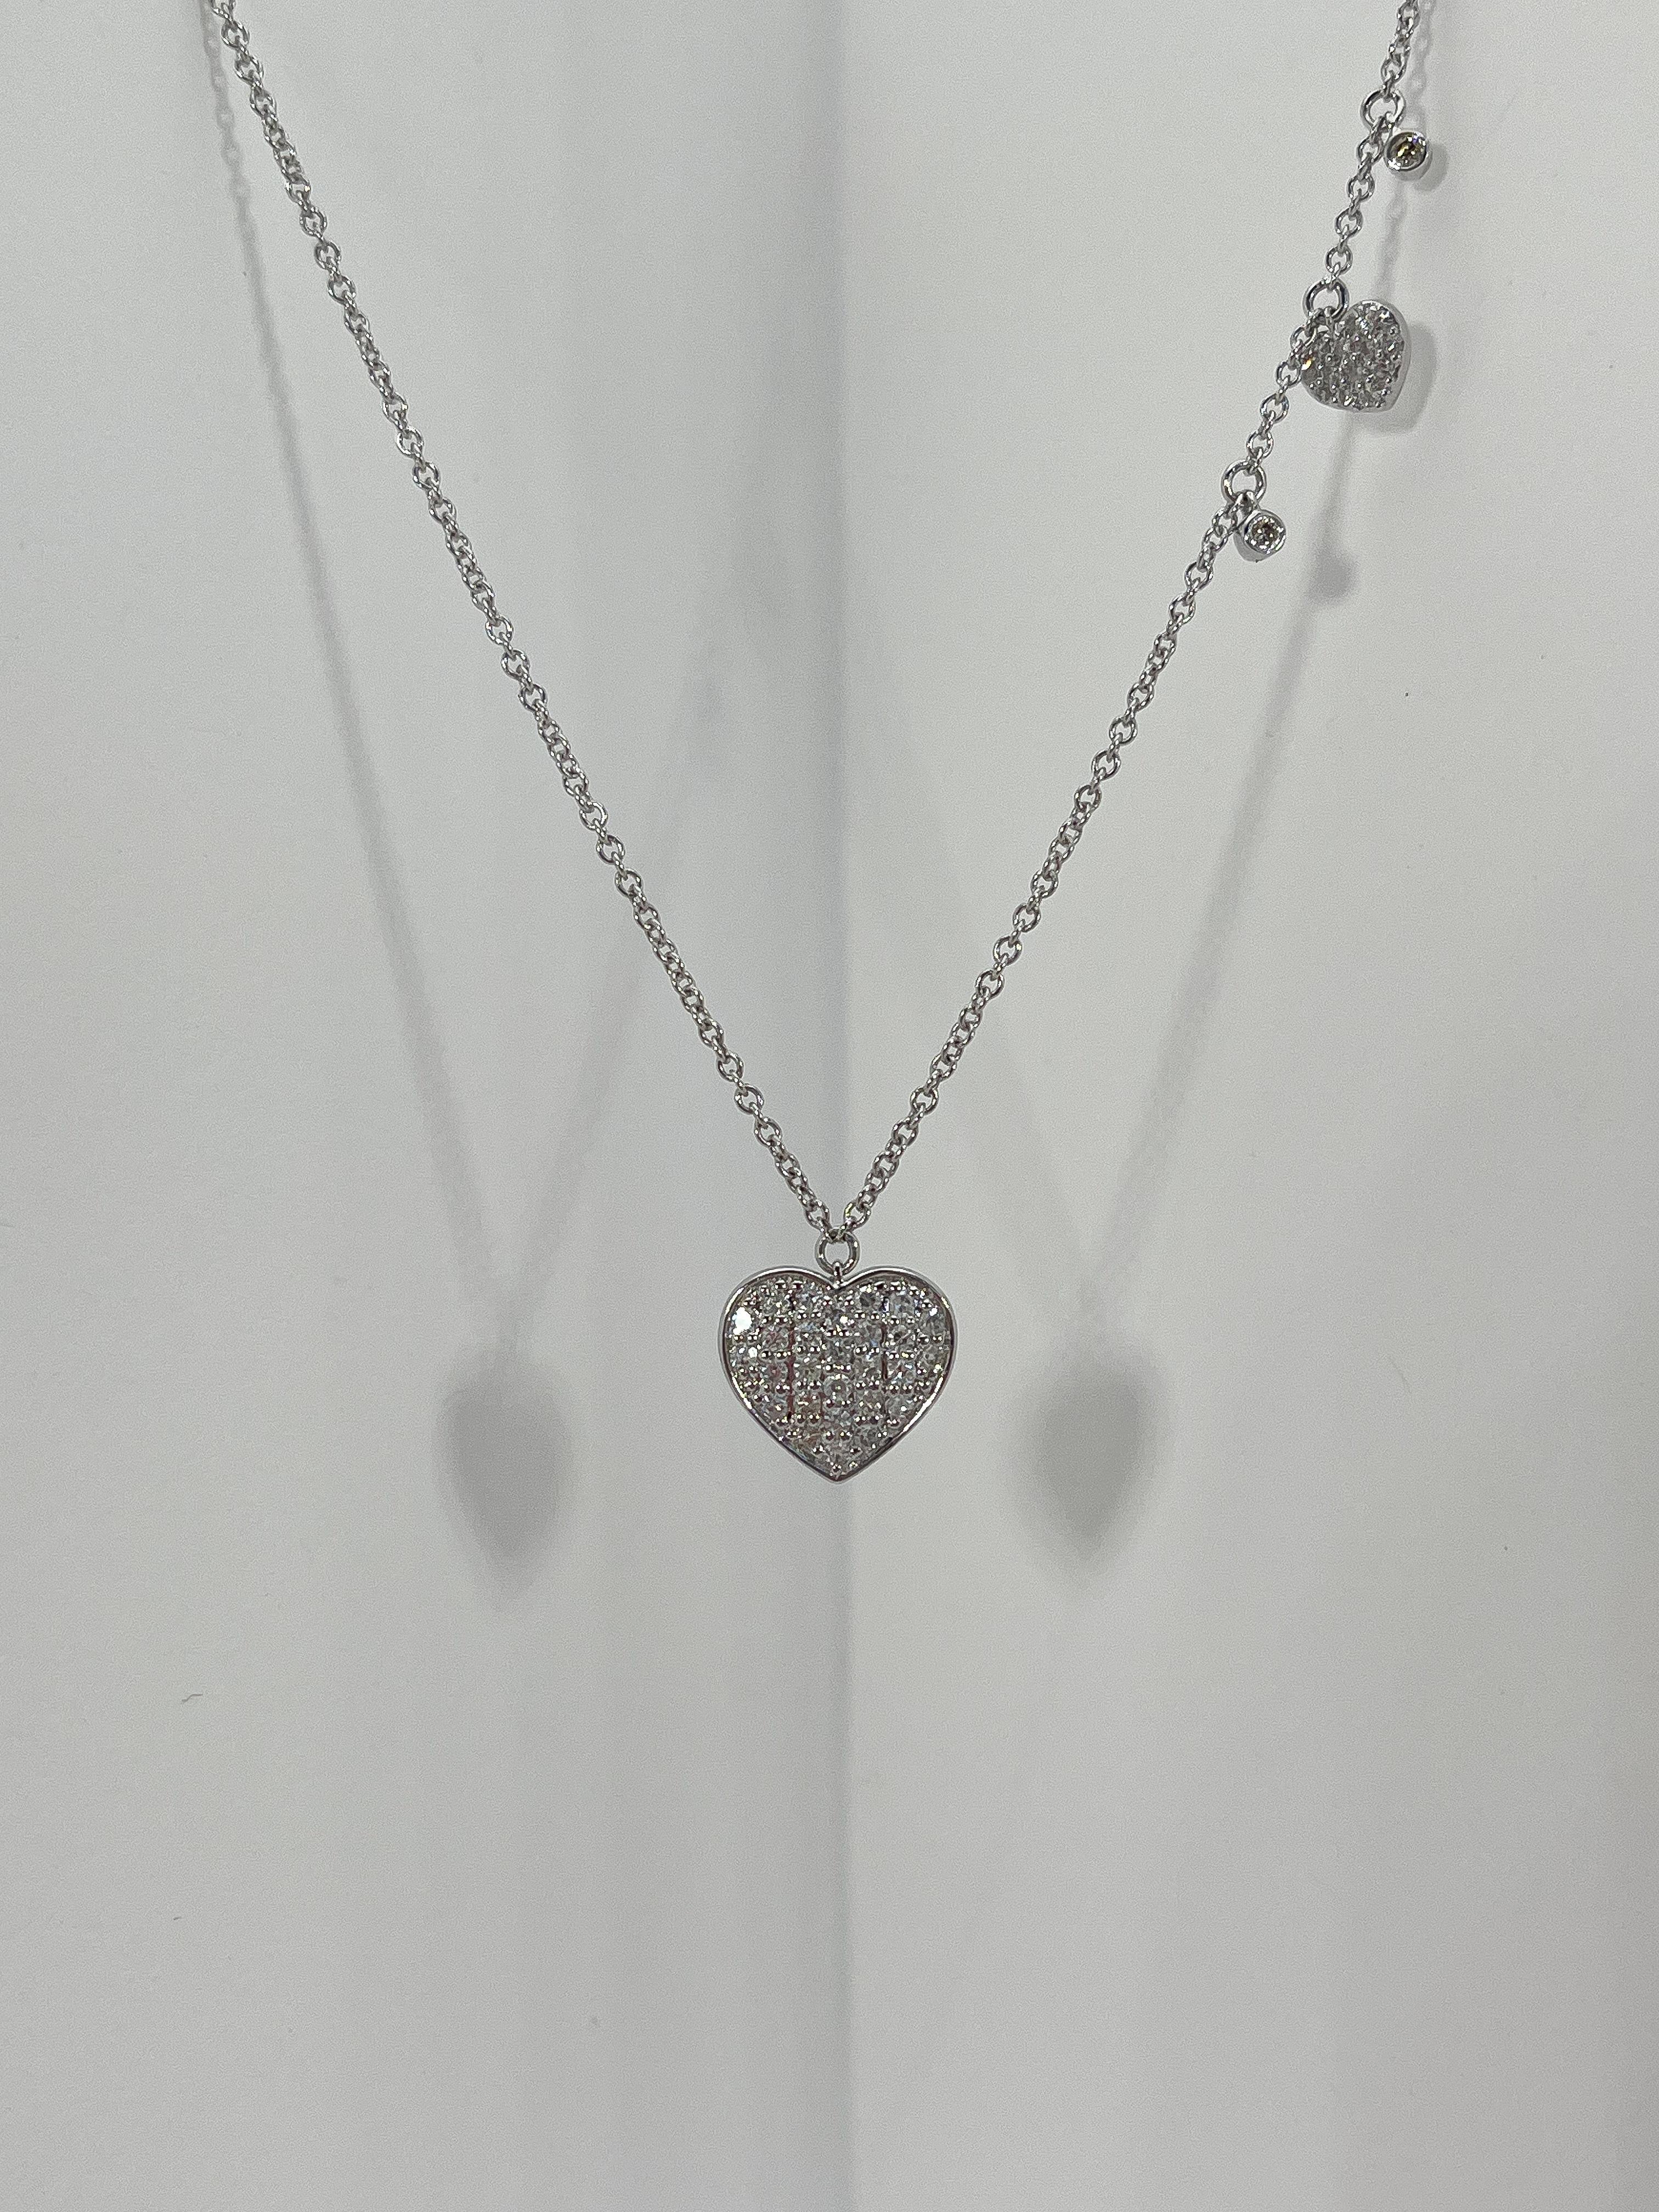 14k white gold diamond heart station necklace. The diamonds in this necklace are all round, the measurements for the pendant are 10.9 x 9 mm, the length of the necklace is 16 inches with an extension to 18'', and the total weight is 3.08 grams